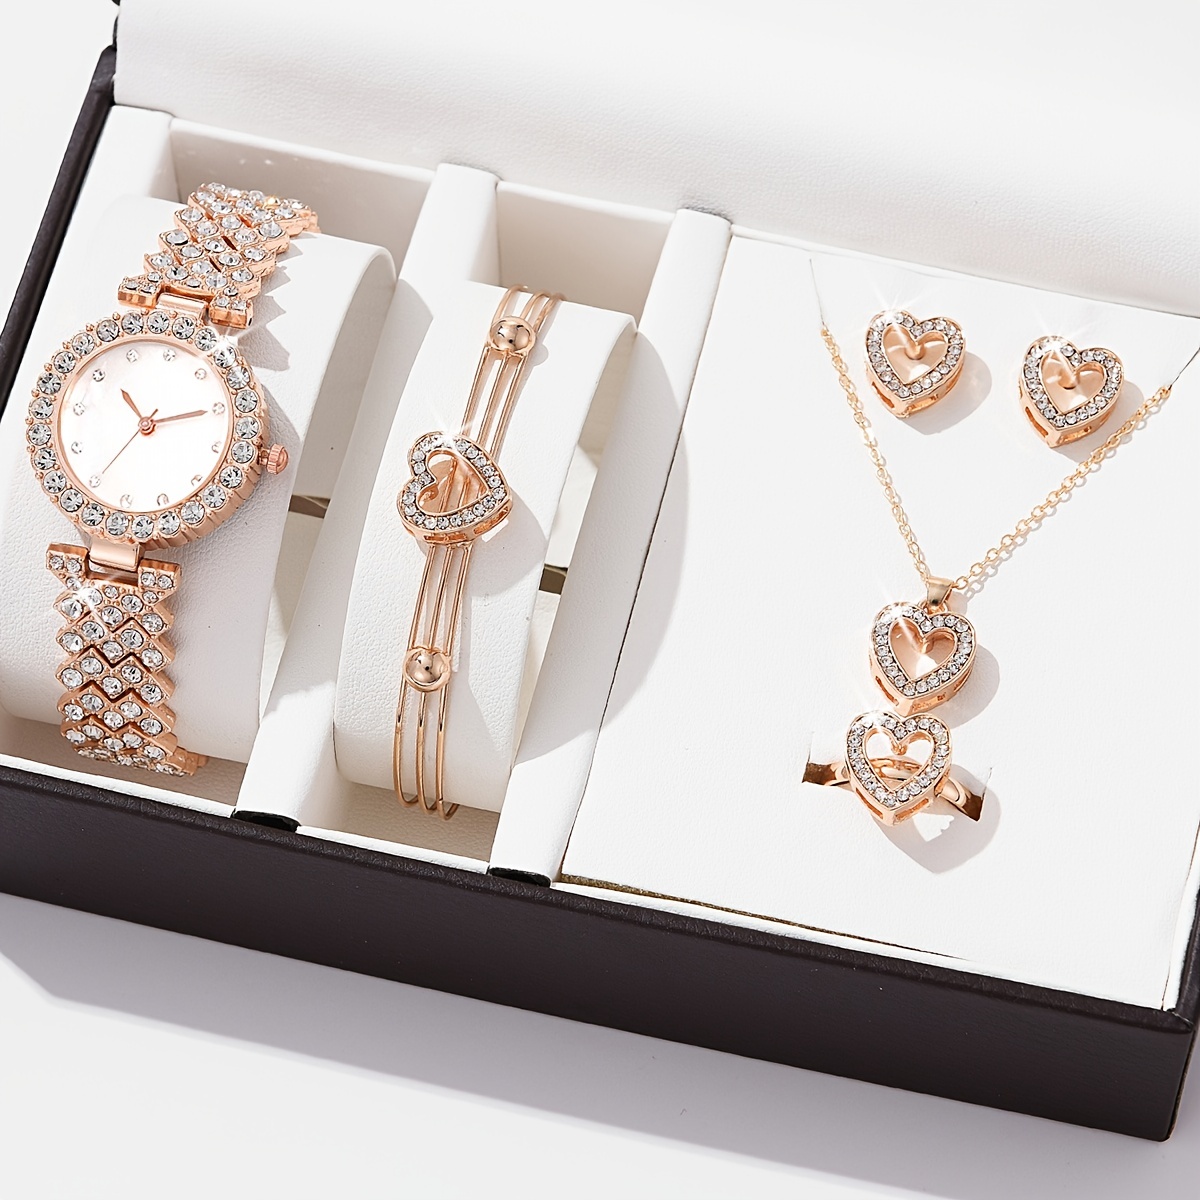 Fashion Superior Quality & Super Classy Complete Set Of Gold Wristwatch/ Necklace/Bracelet/Earring/Ring | Jumia Nigeria